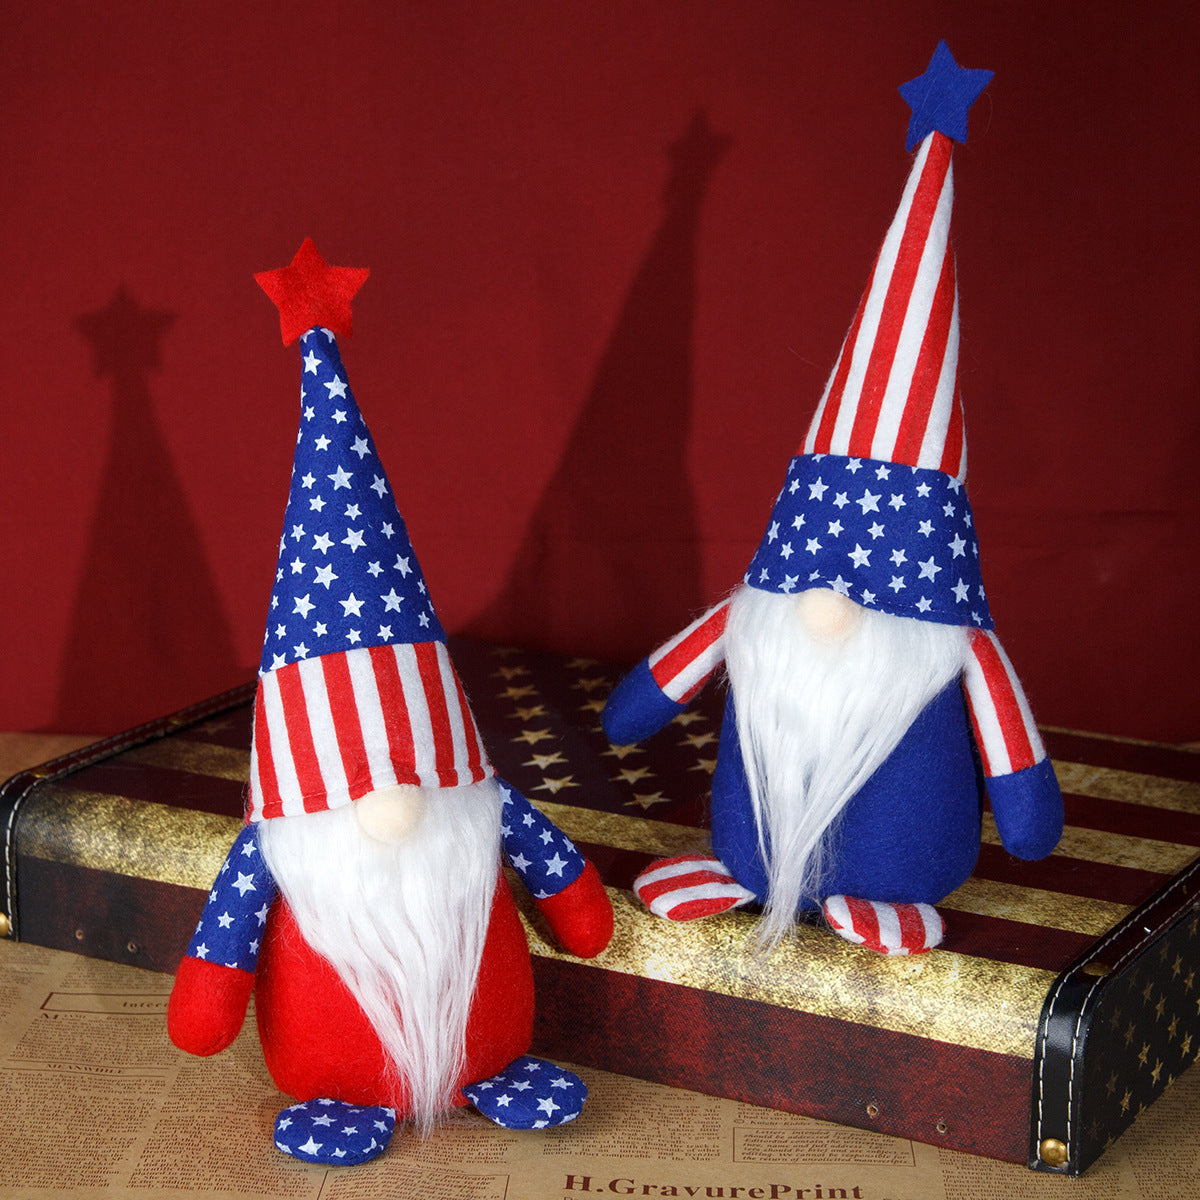 Stars Pointed Hat 4th of july gnomes, 4th July gnomes, Independence Day gnomes, Patriotic gnomes, American flag gnomes, Uncle Sam gnomes, Fireworks gnomes, Red, white, and blue gnomes, Bald eagle gnomes, Liberty bell gnomes, Stars and stripes gnomes, Statue of Liberty gnomes, Patriotic decorations, Happy Independence Day gnomes